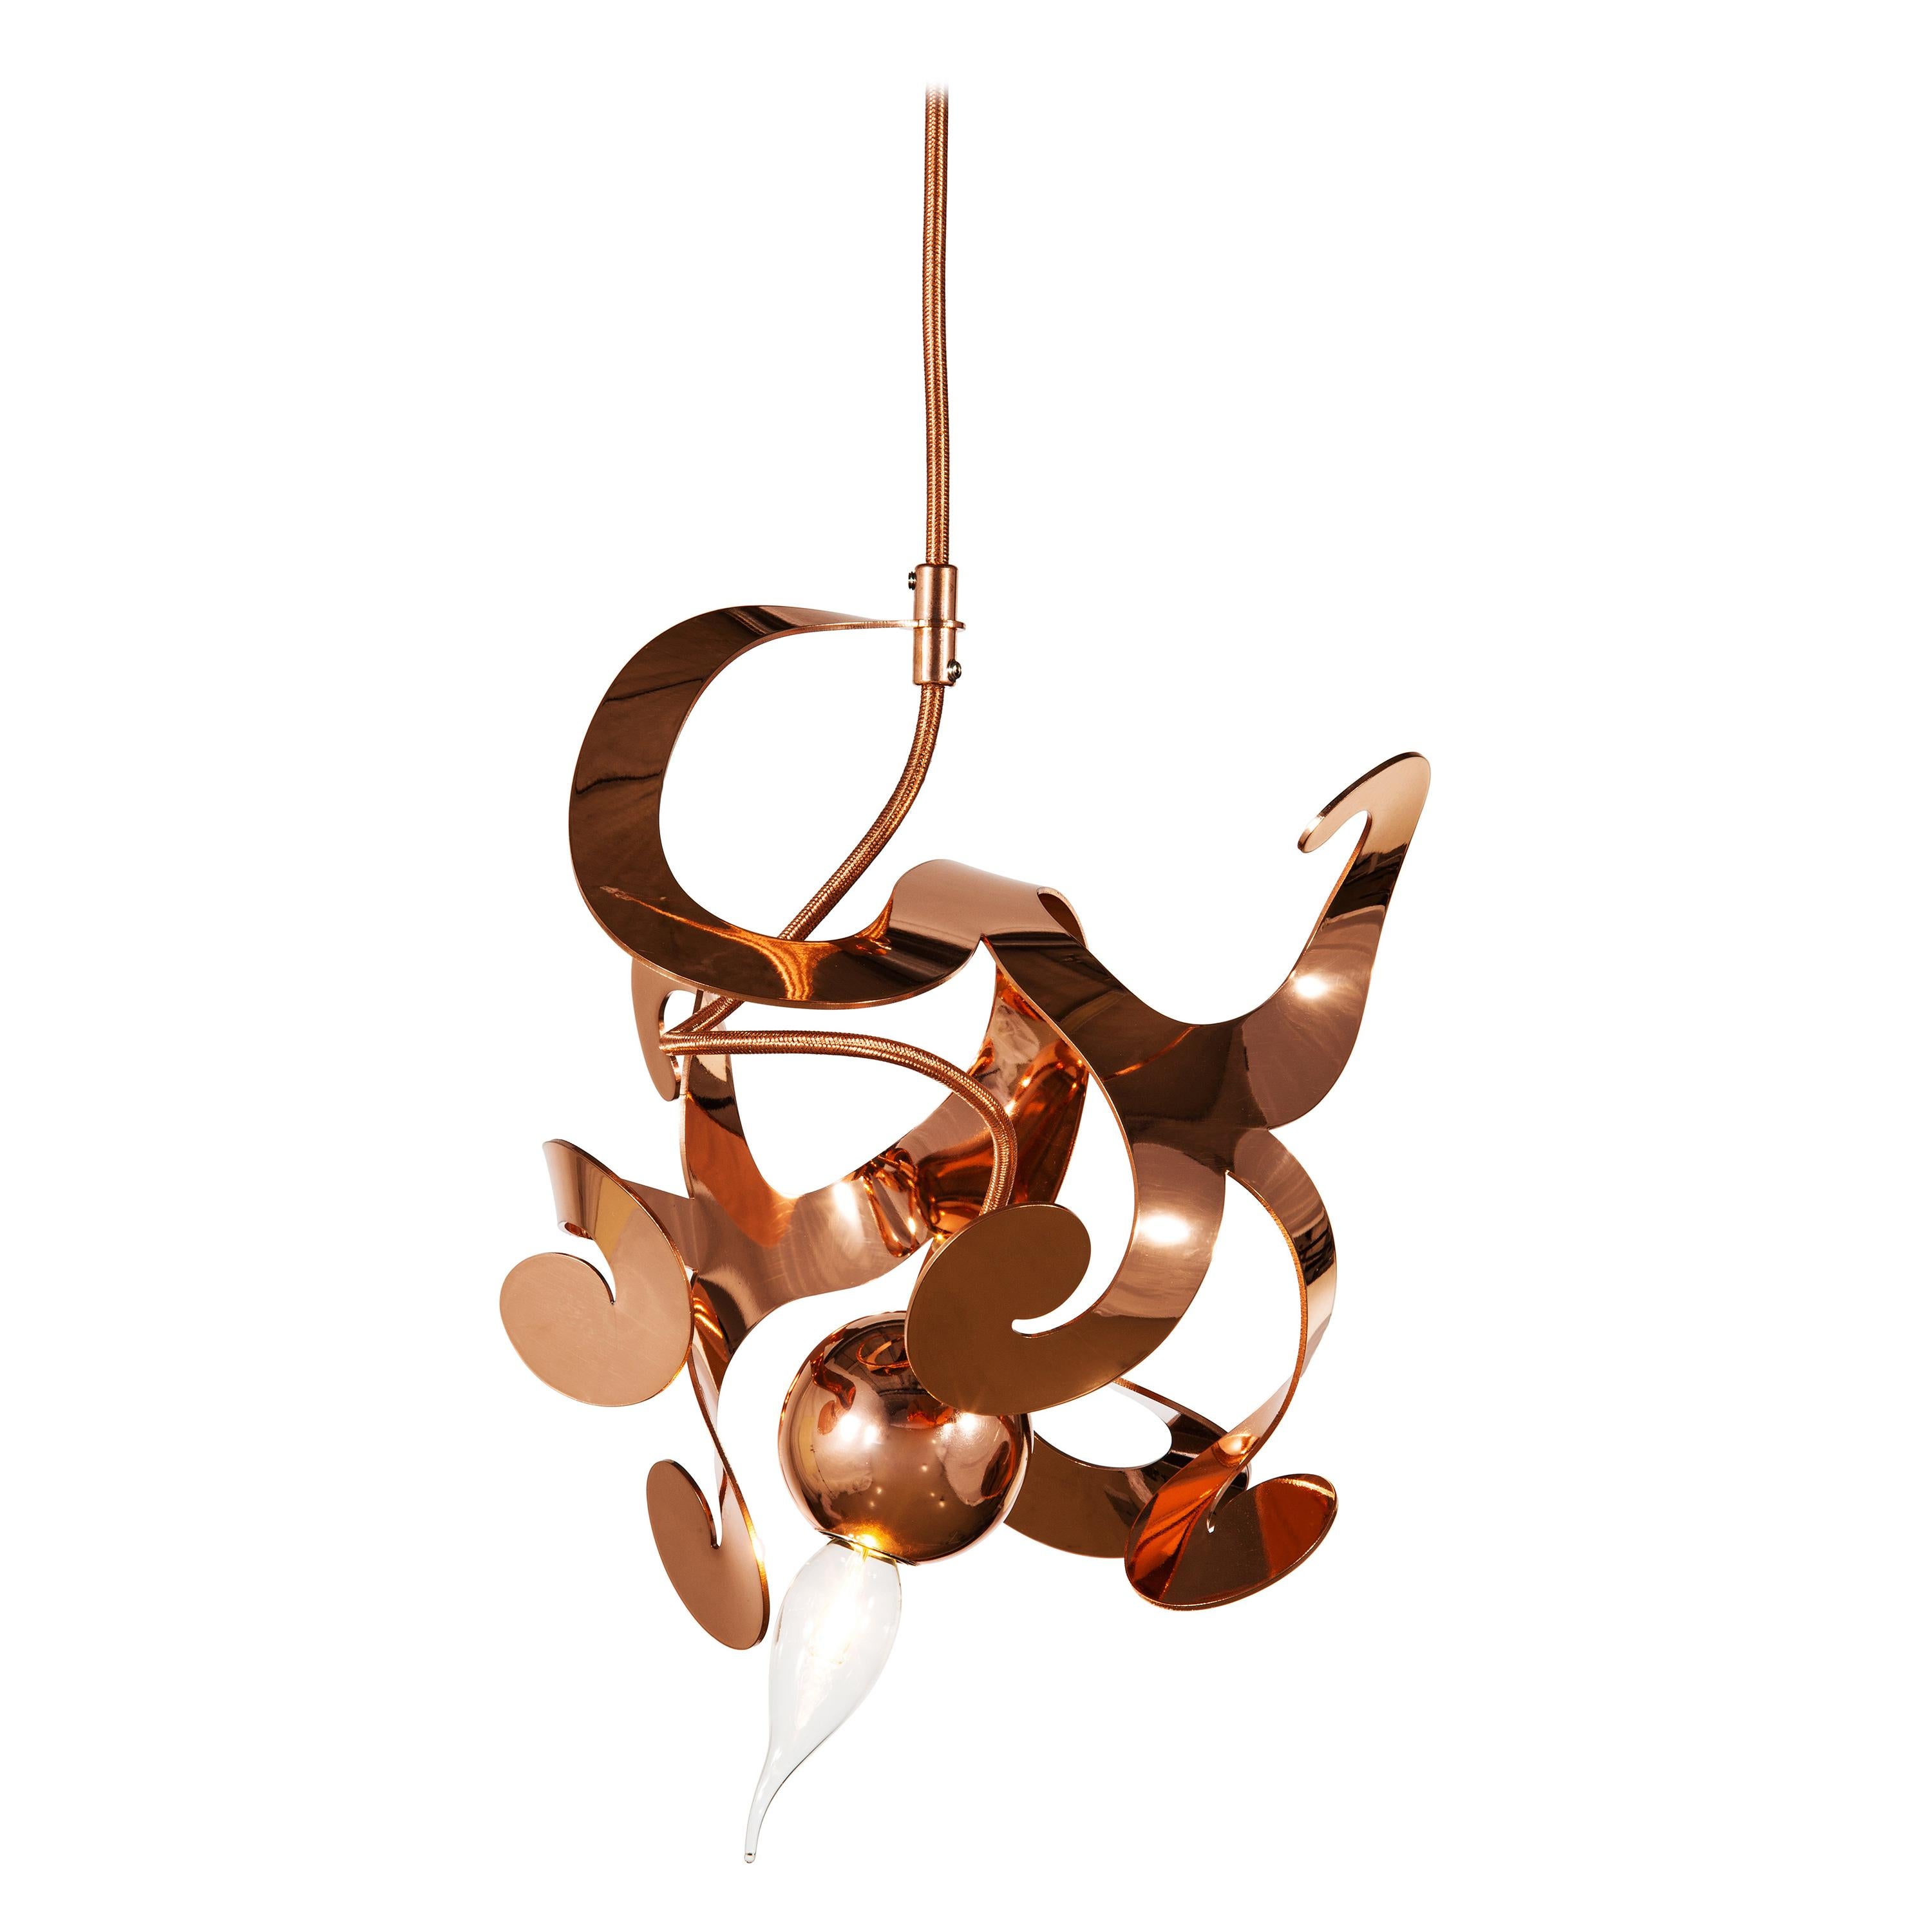 Modern pendant in a copper finish - Kelp collection, by BRAND VAN EGMOND  